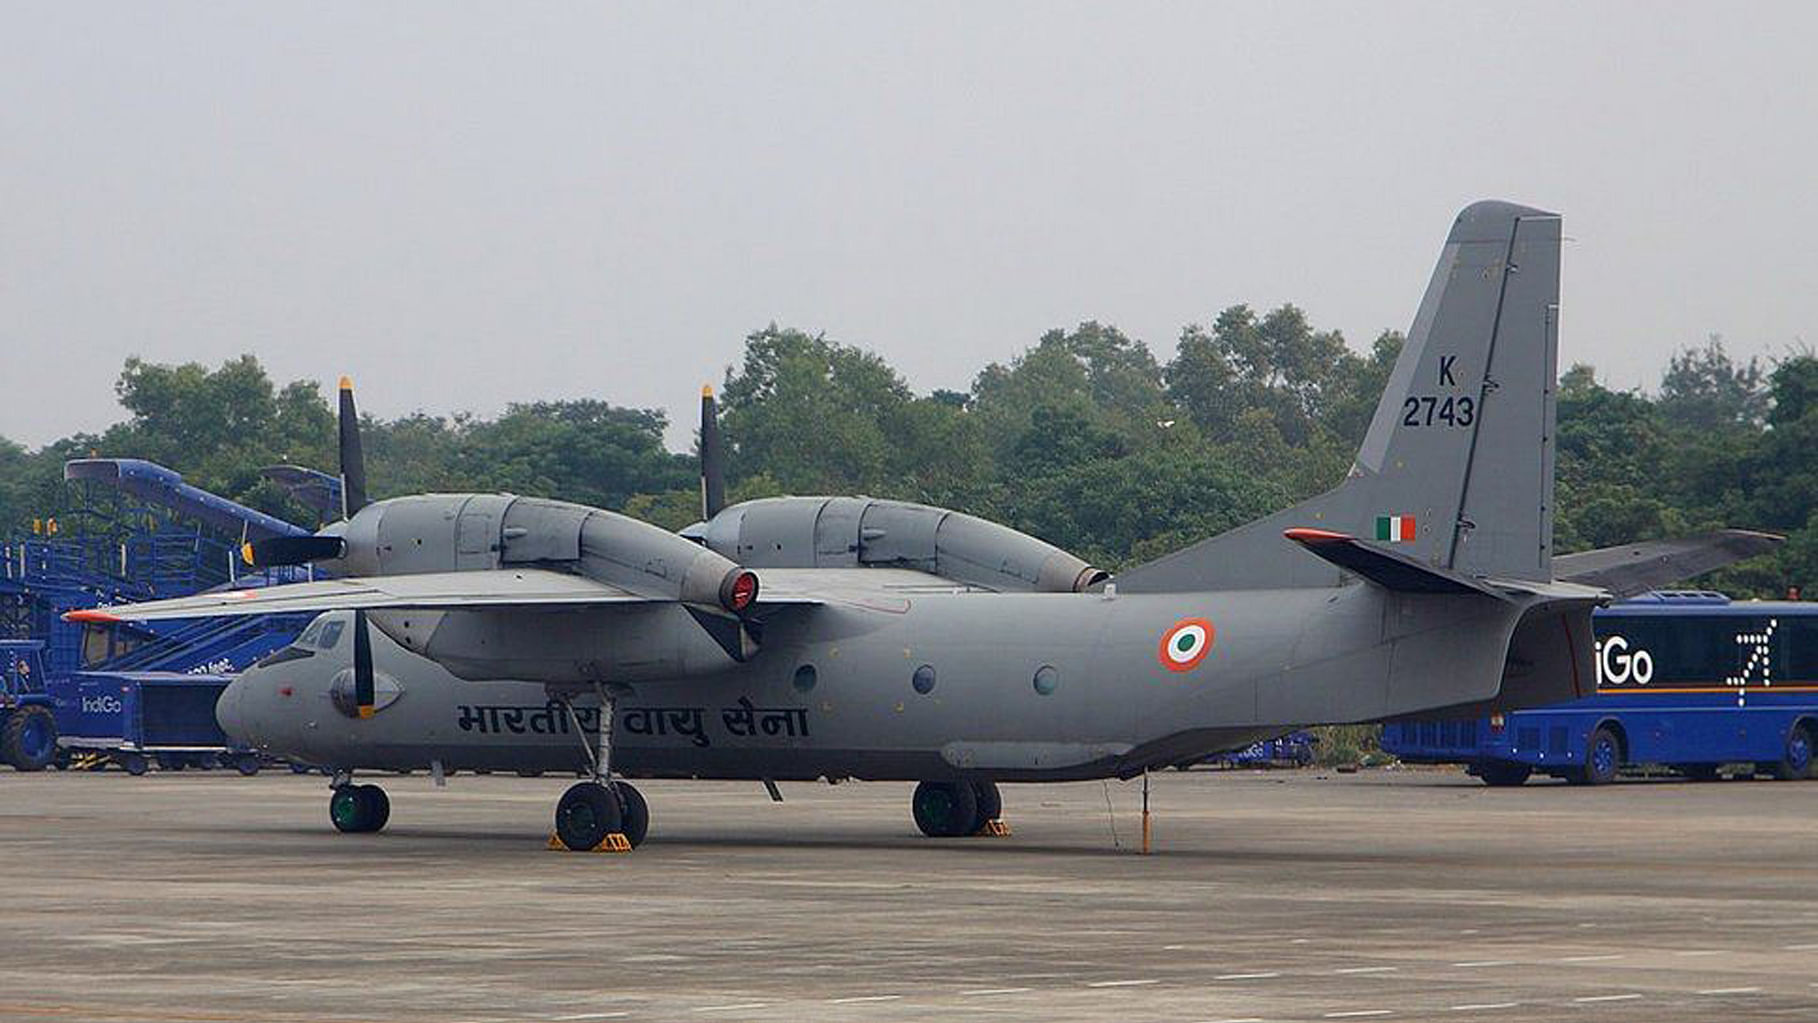 <div class="paragraphs"><p>File photo of the same Indian Air Force An-32 (K-2743) that’s currently missing over the Bay of Bengal. </p></div>